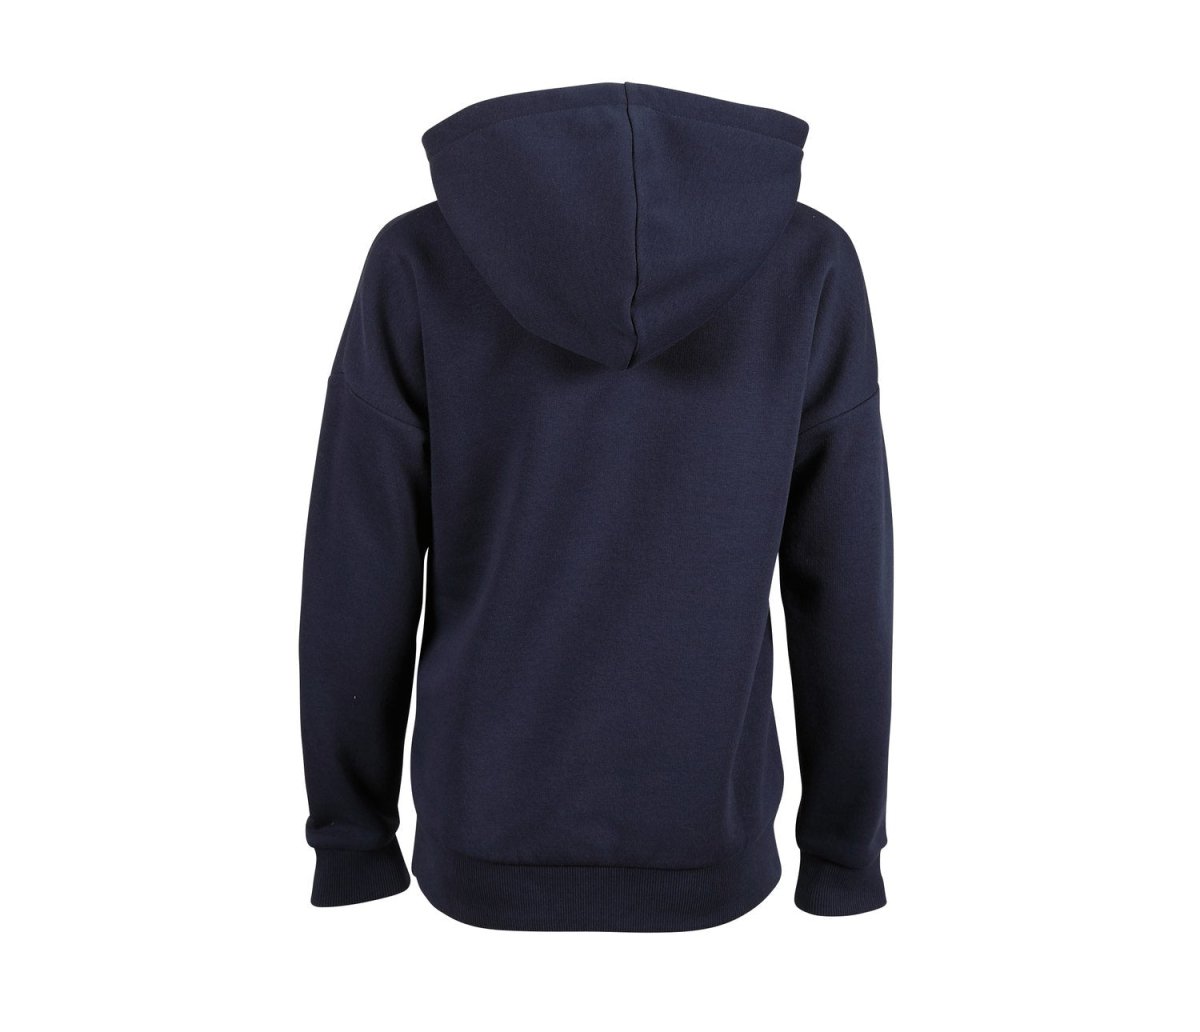 Aubrion SS24 Serene Hoodie - Young Rider - Navy - 7/8 Years